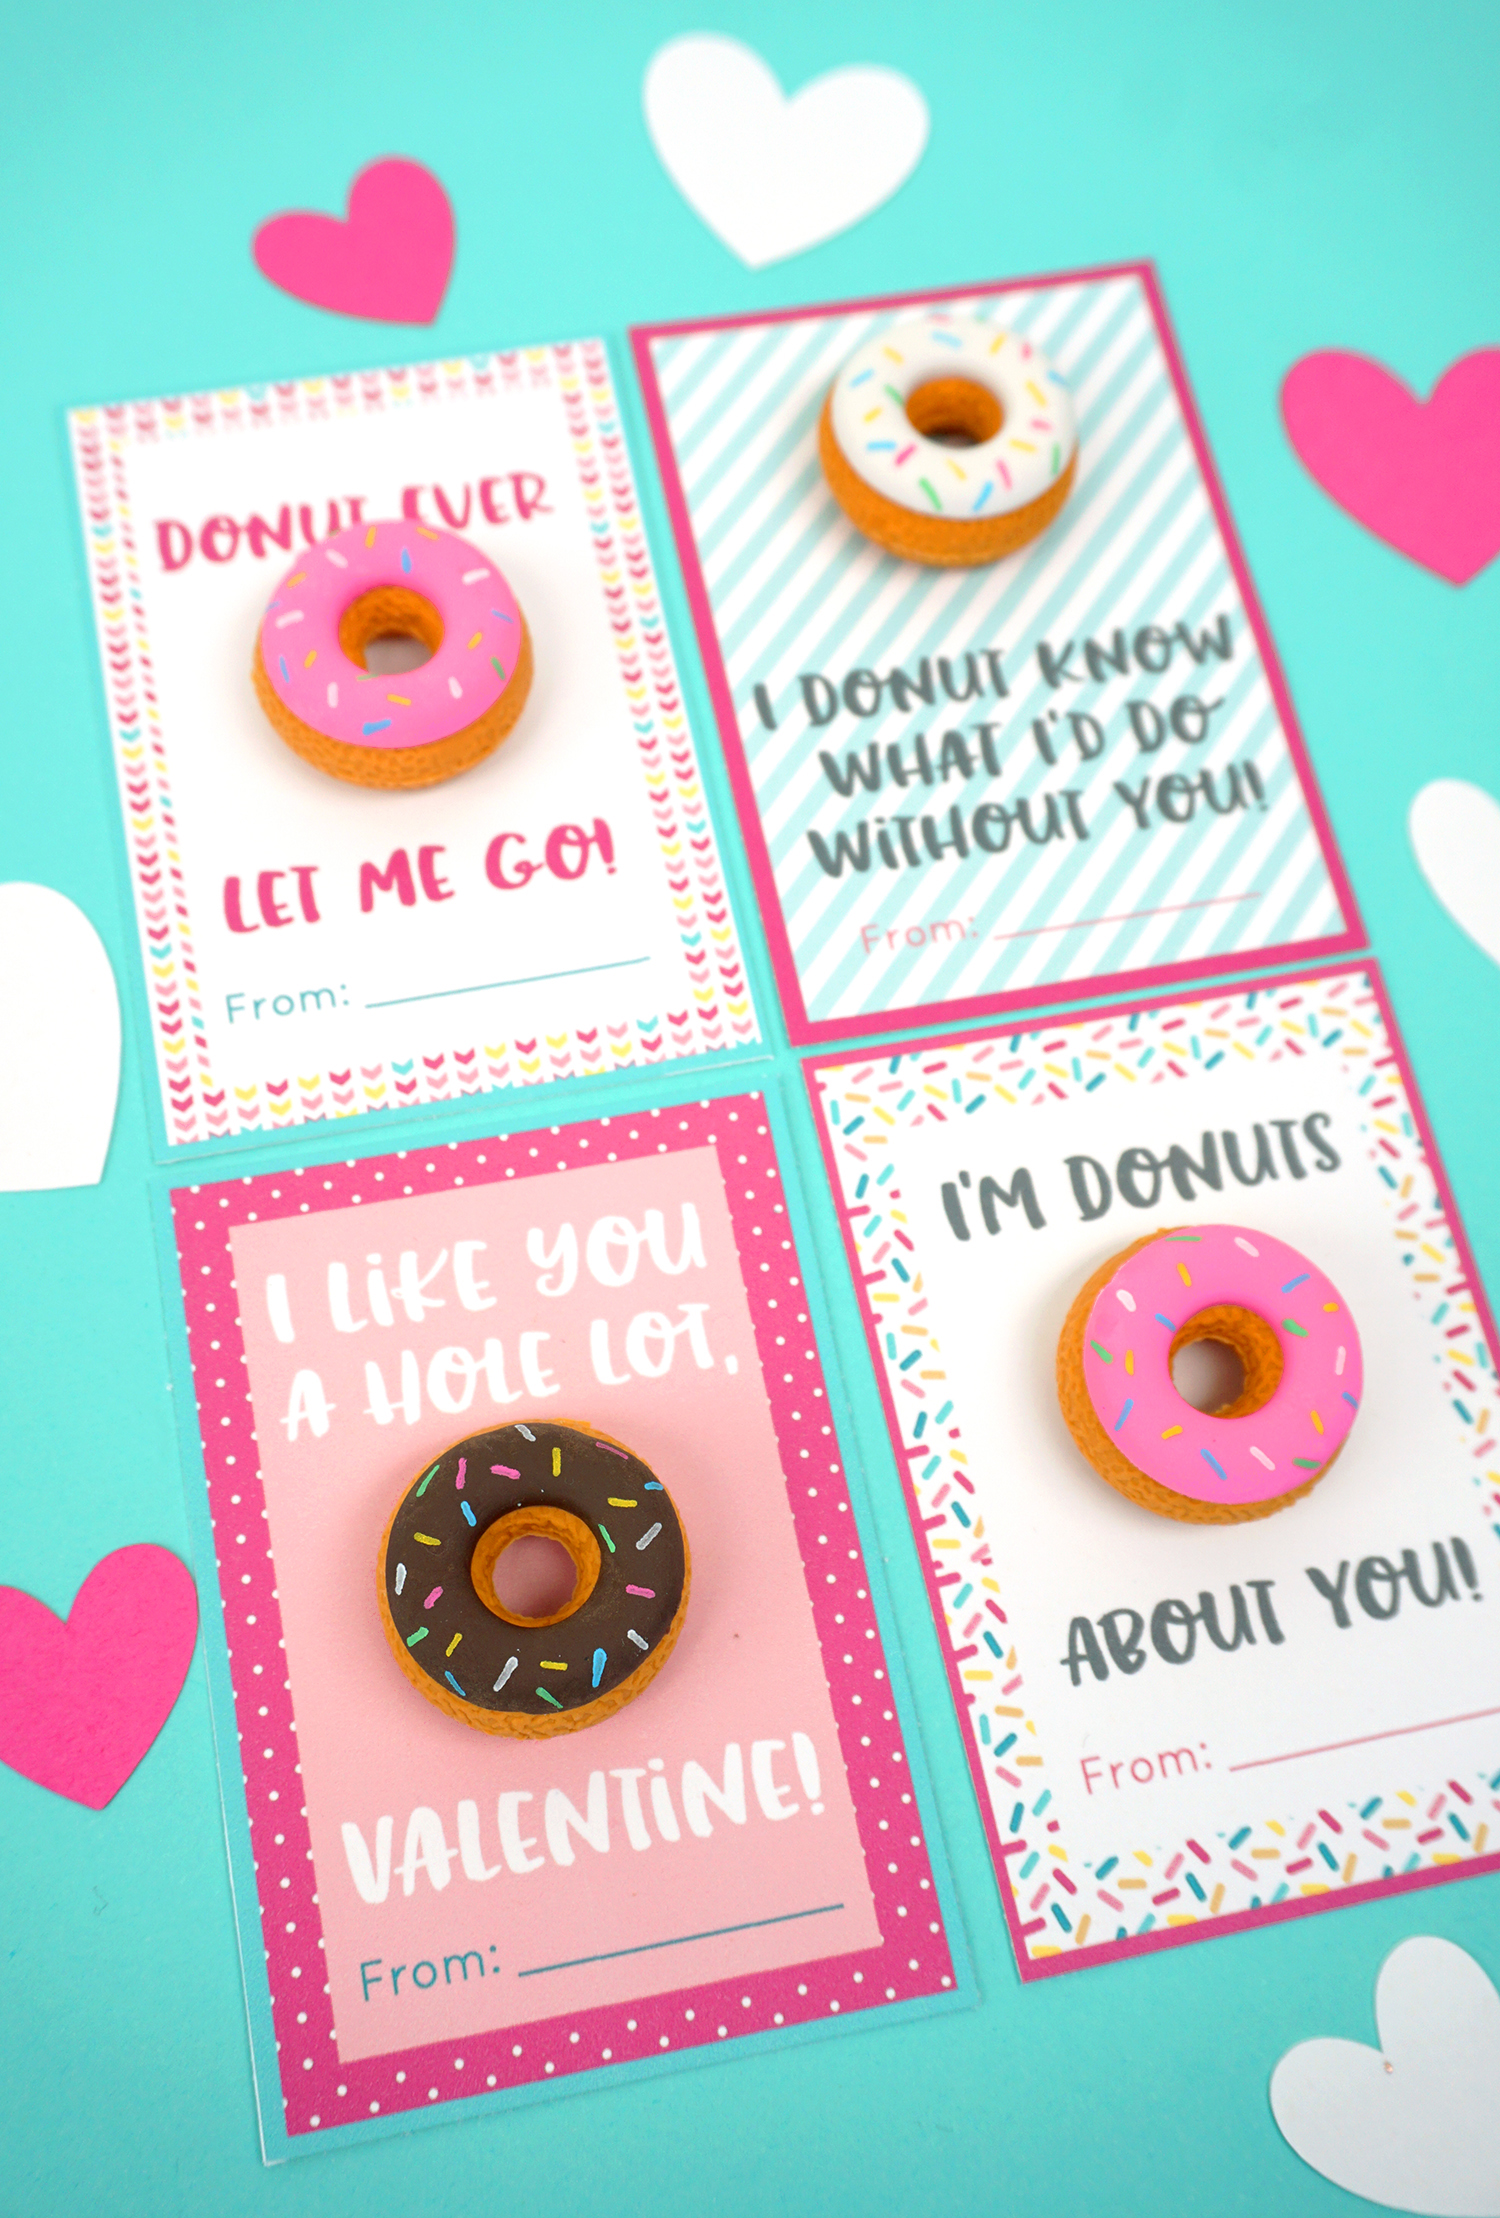 Printable Donut Valentine Cards Happiness Is Homemade